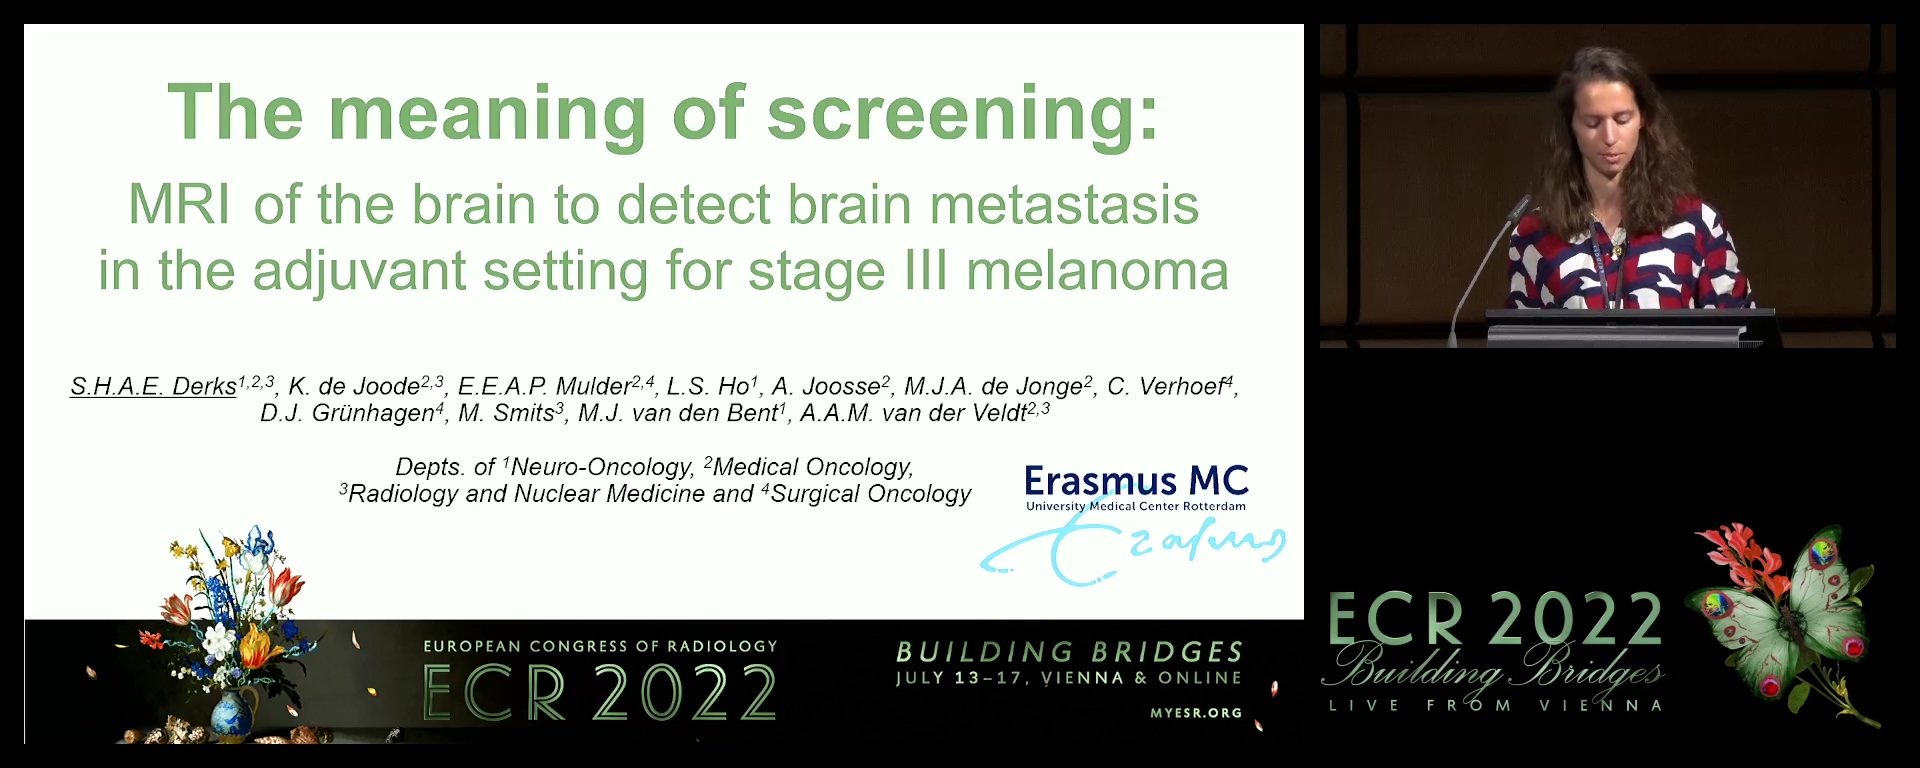 Clinical value of MRI screening for brain metastases in resected stage III melanoma - Sophie Derks, Rotterdam / NL